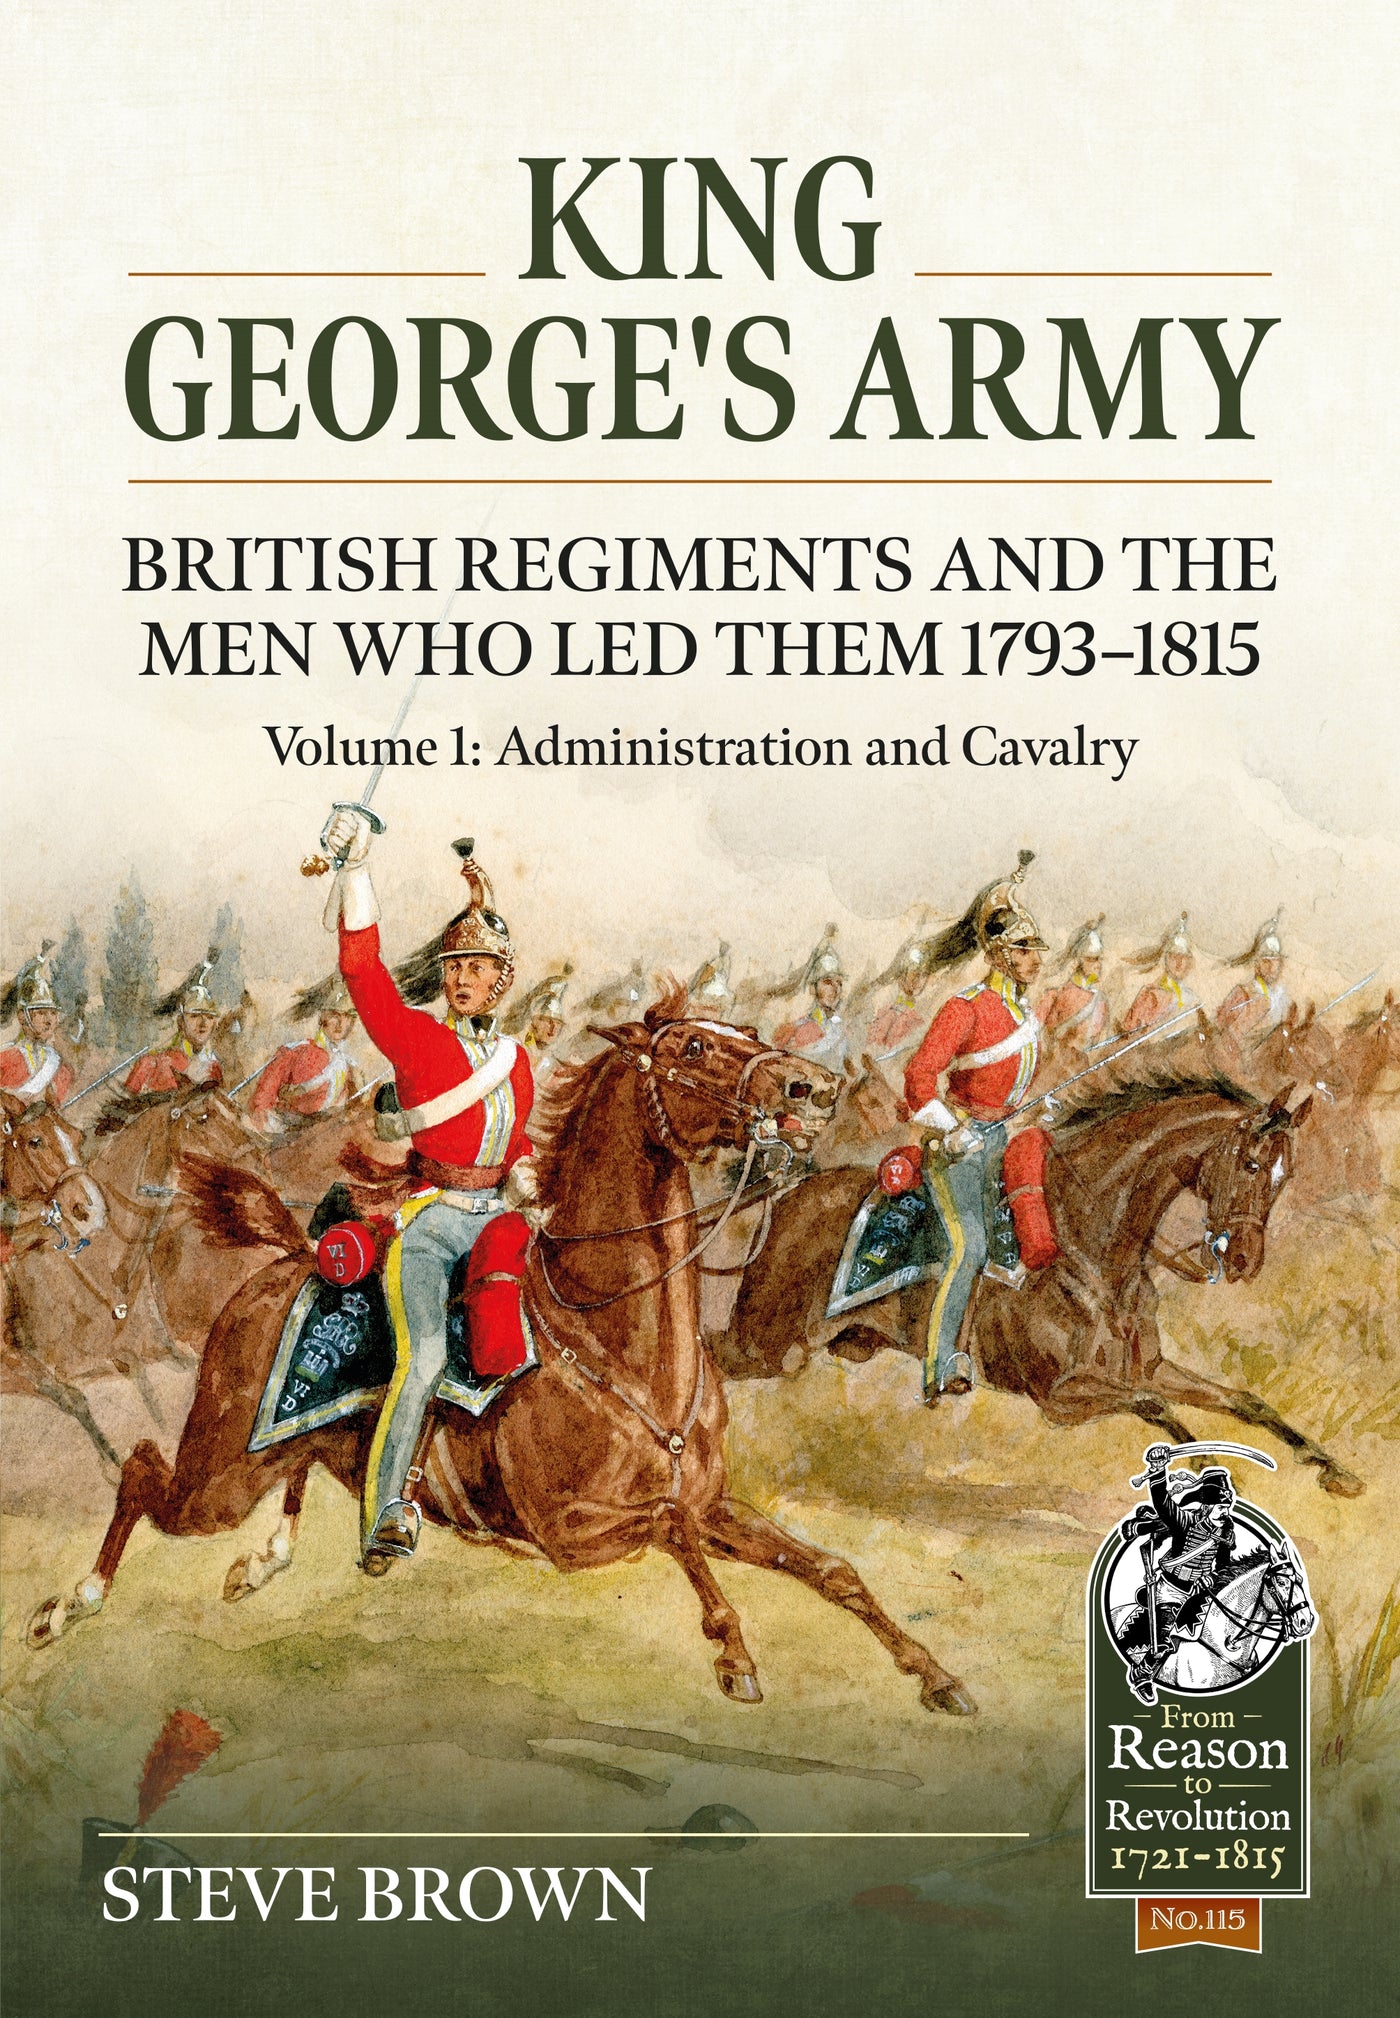 King George's Army: British Regiments and the Men Who Led Them 1793-1815